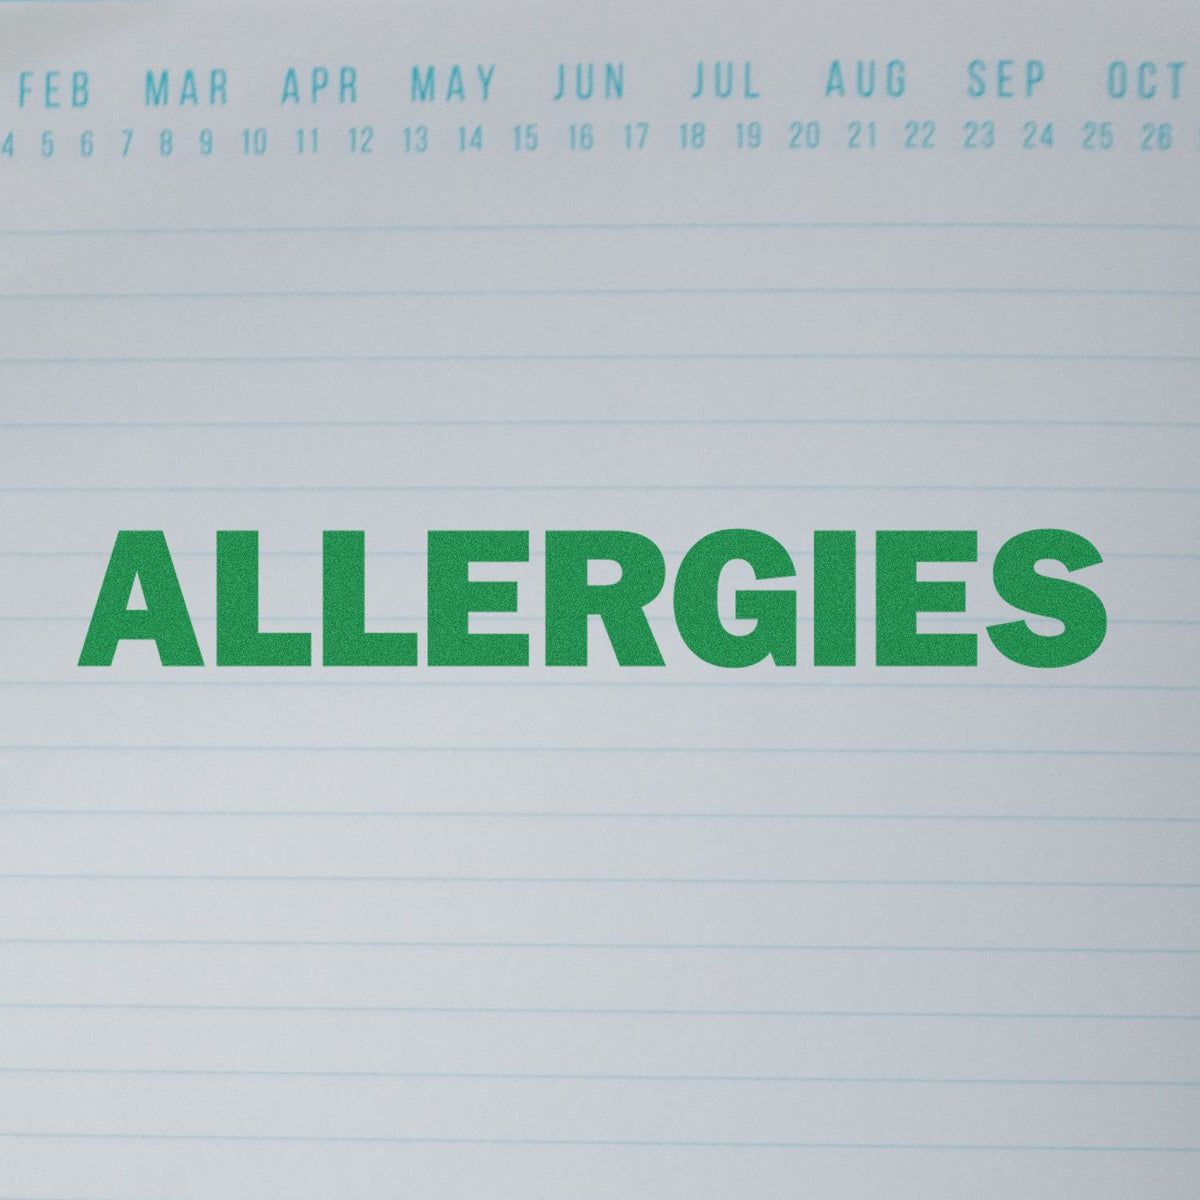 Allergies Rubber Stamp In Use